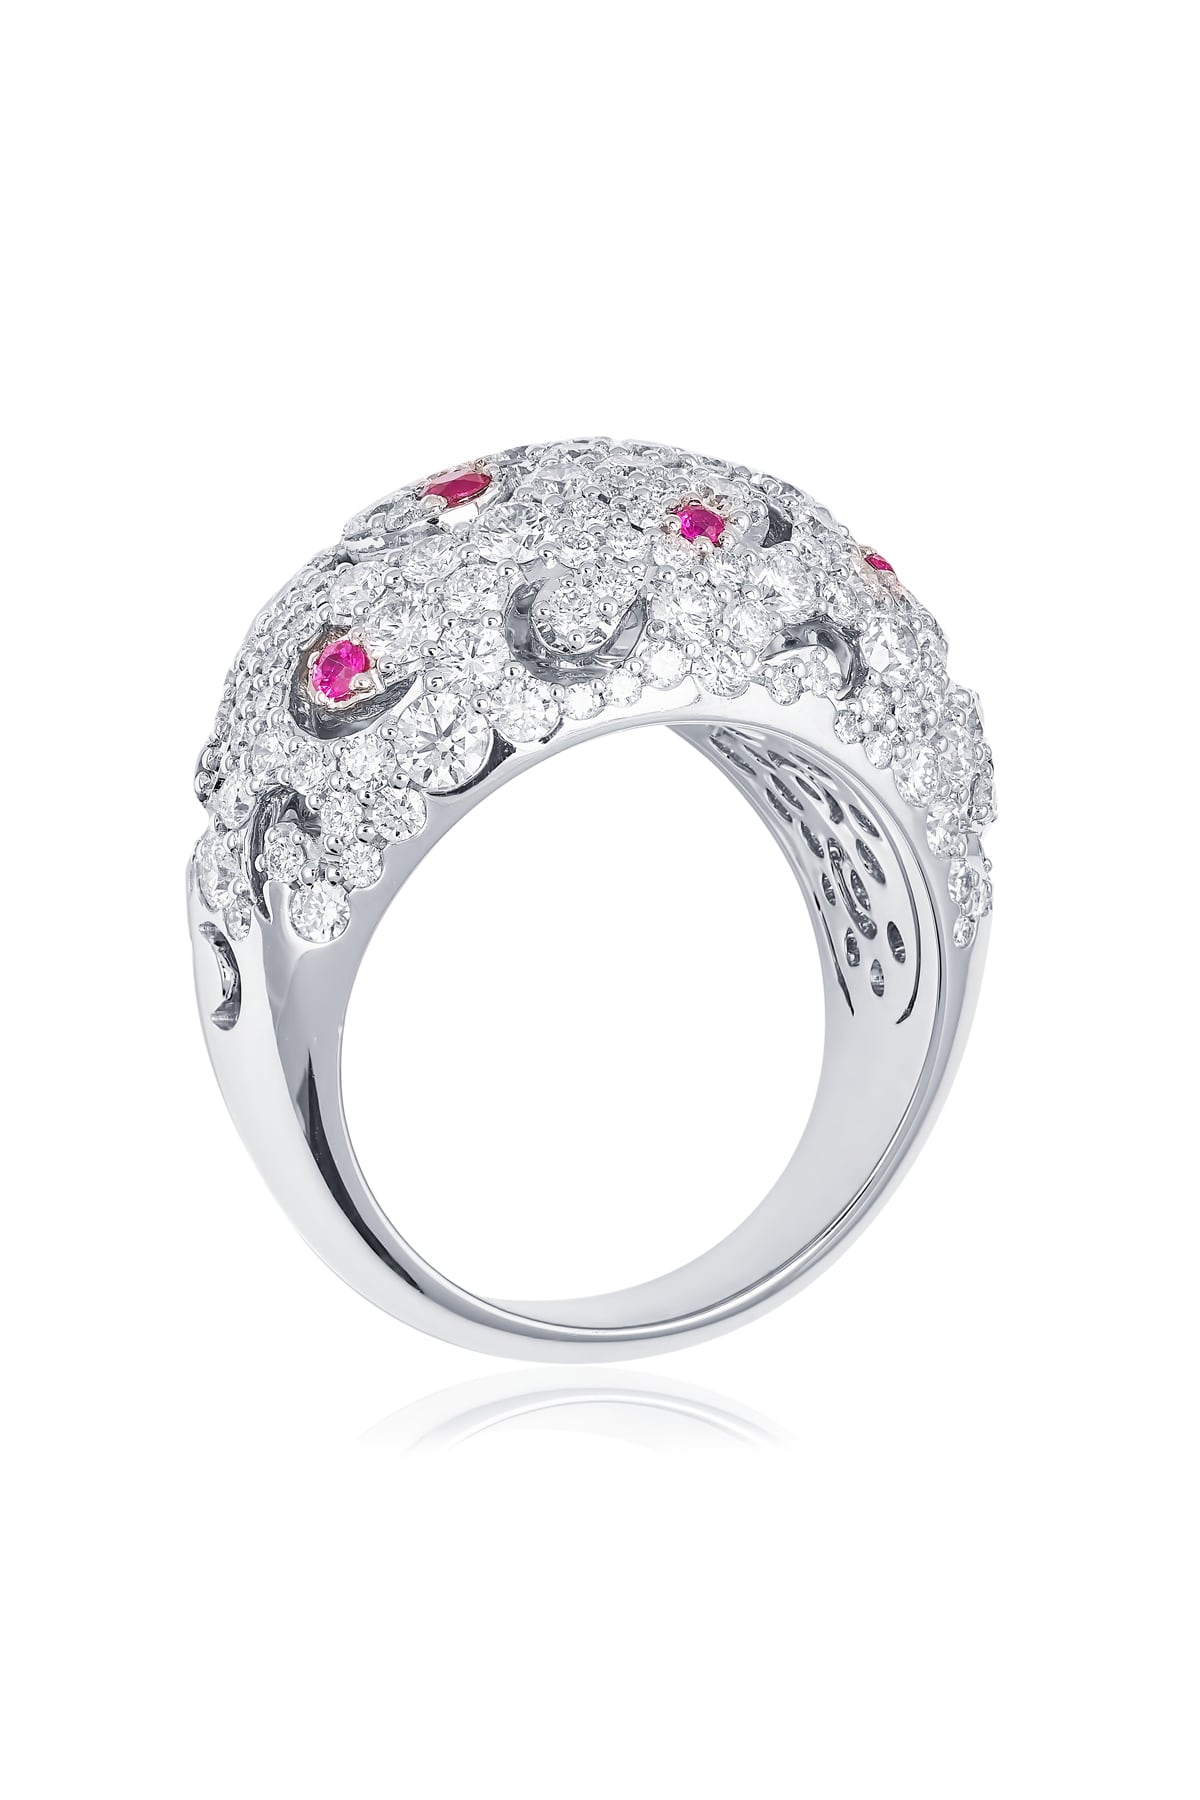 18 Carat Gold 2.95ct Diamond & Ruby Cocktail Ring from LeGassick.